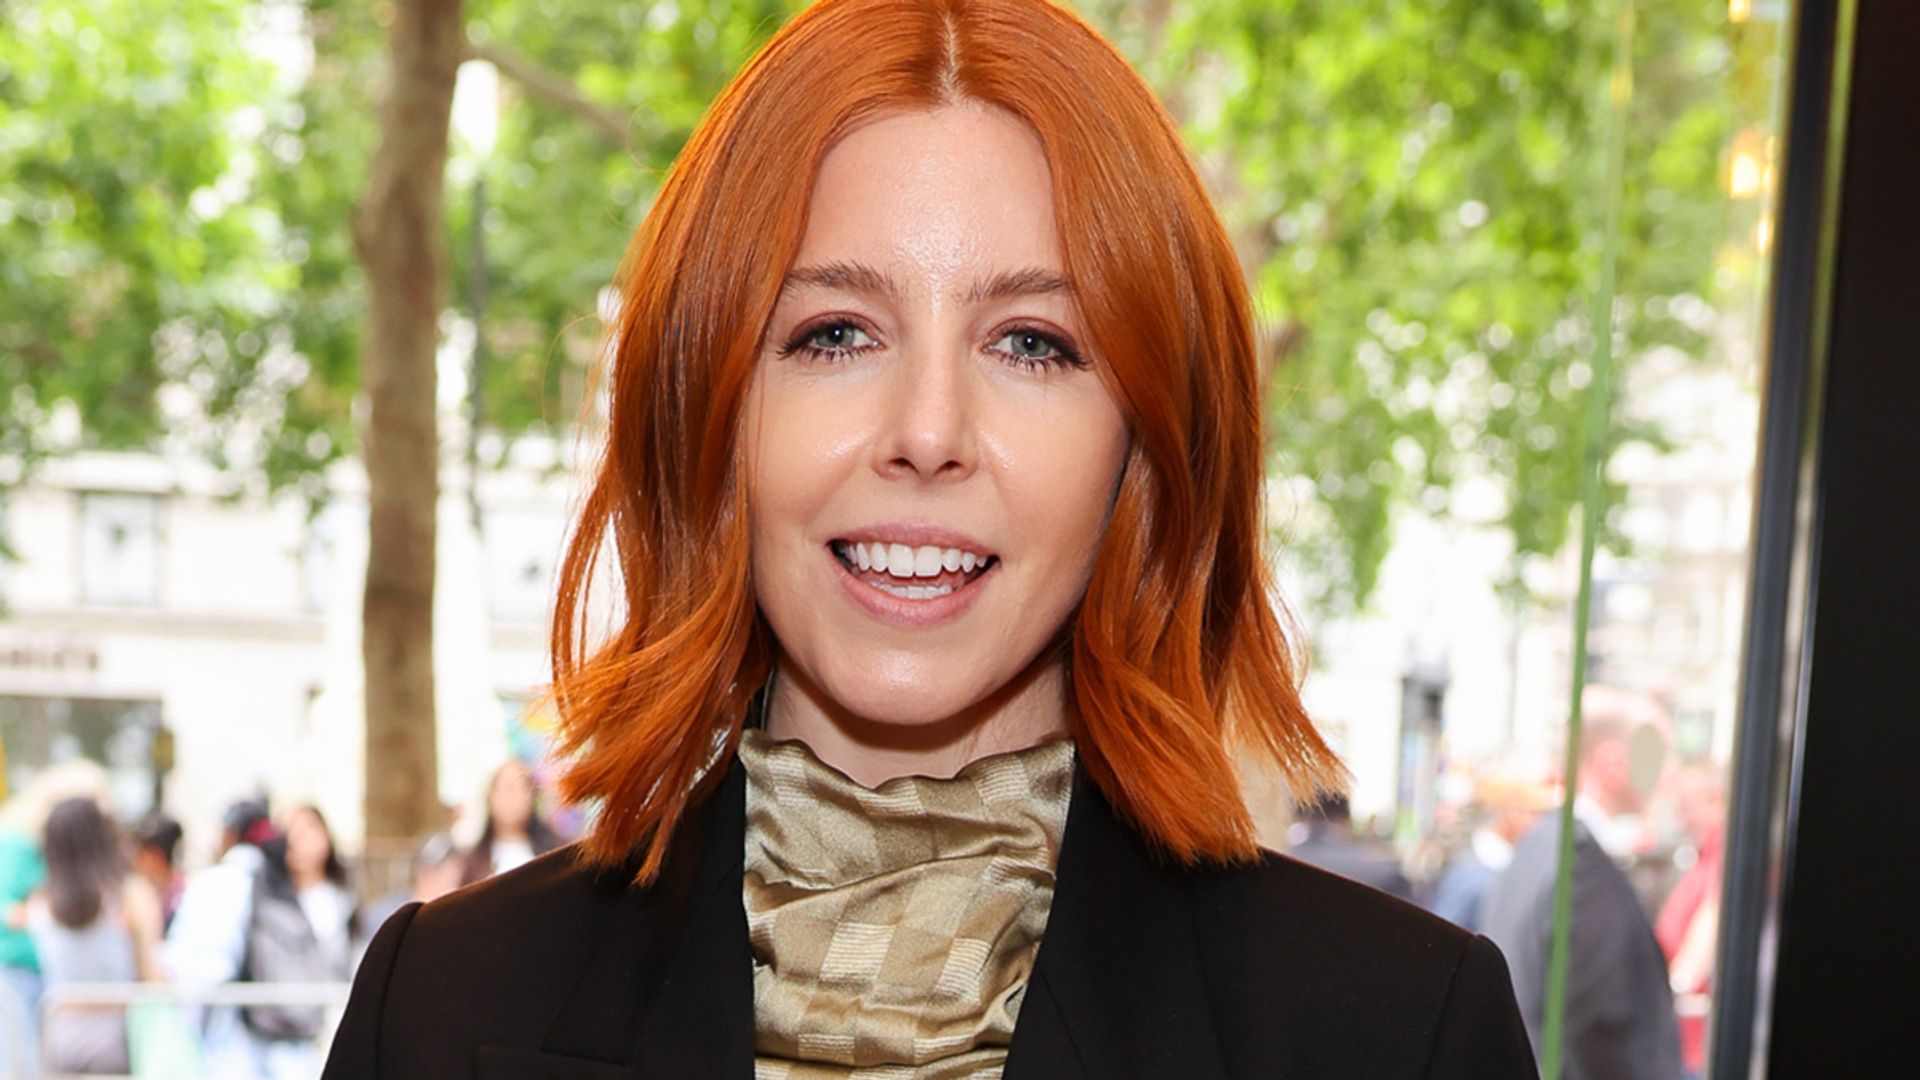 Stacey Dooley is the coolest new mum in her midriff-bearing crop top and baggy jeans